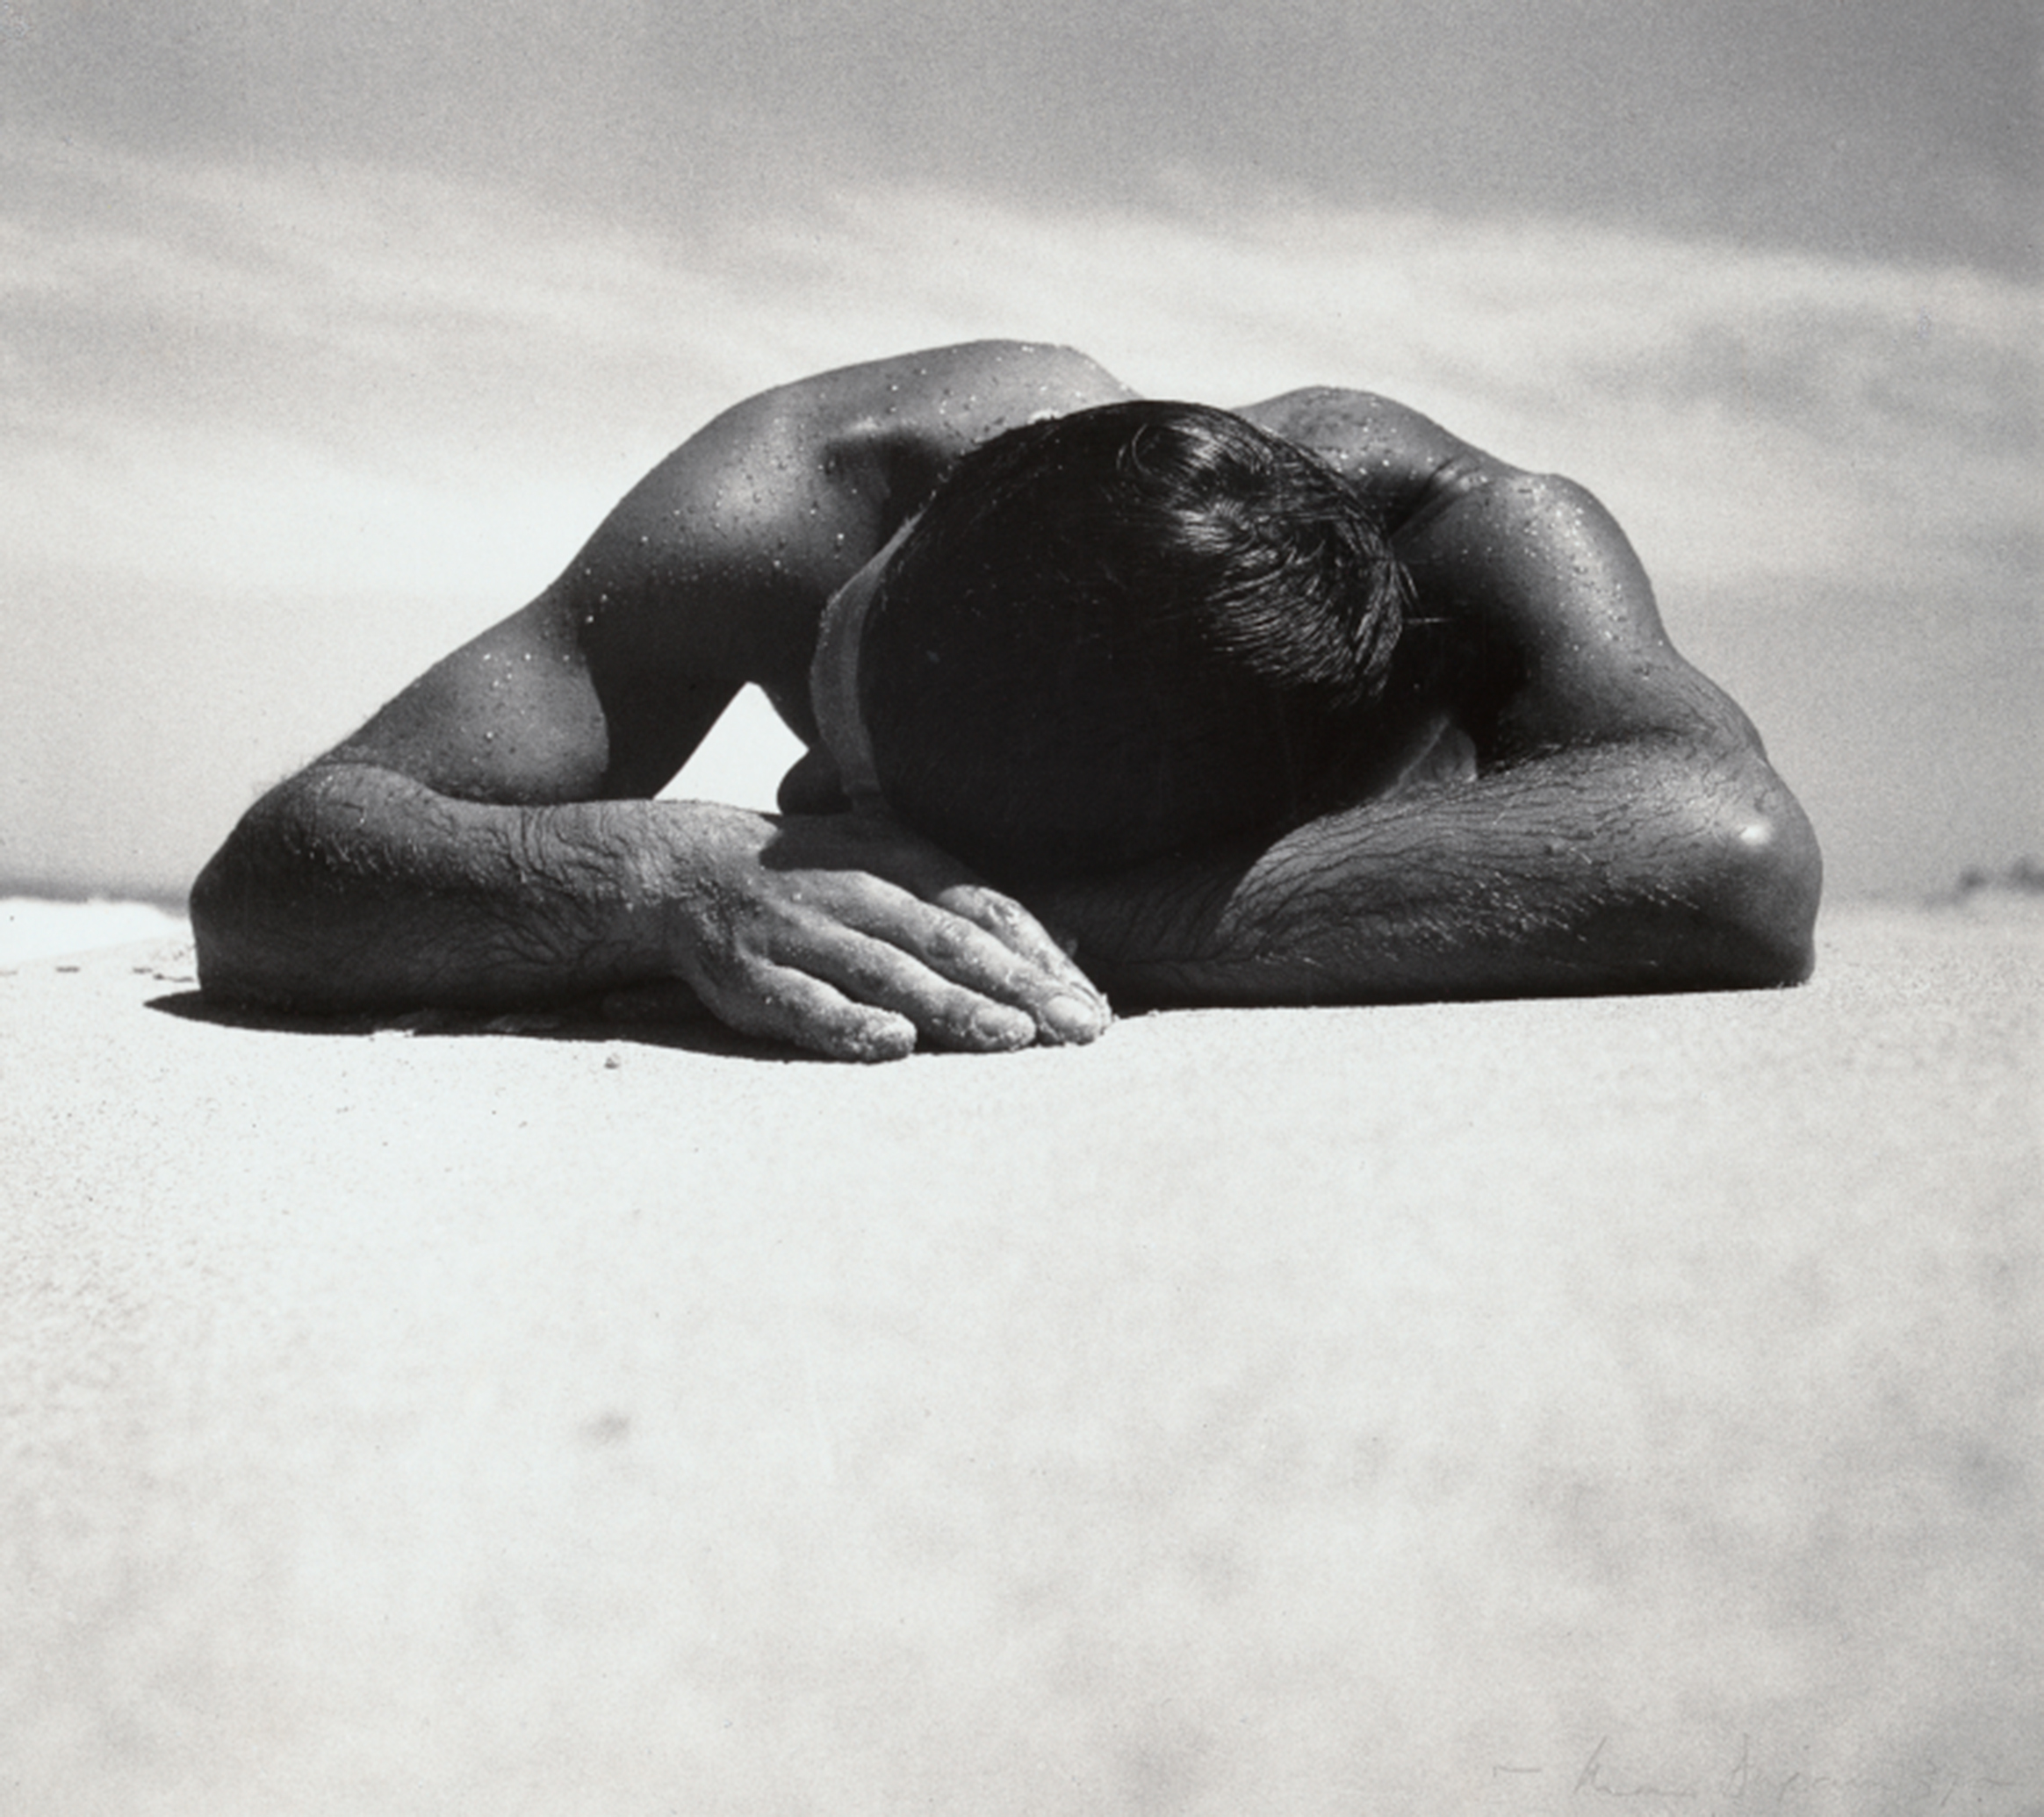 Black and white photograph by Max Dupain of a male sunbather lying face down with their head resting on crossed arms.